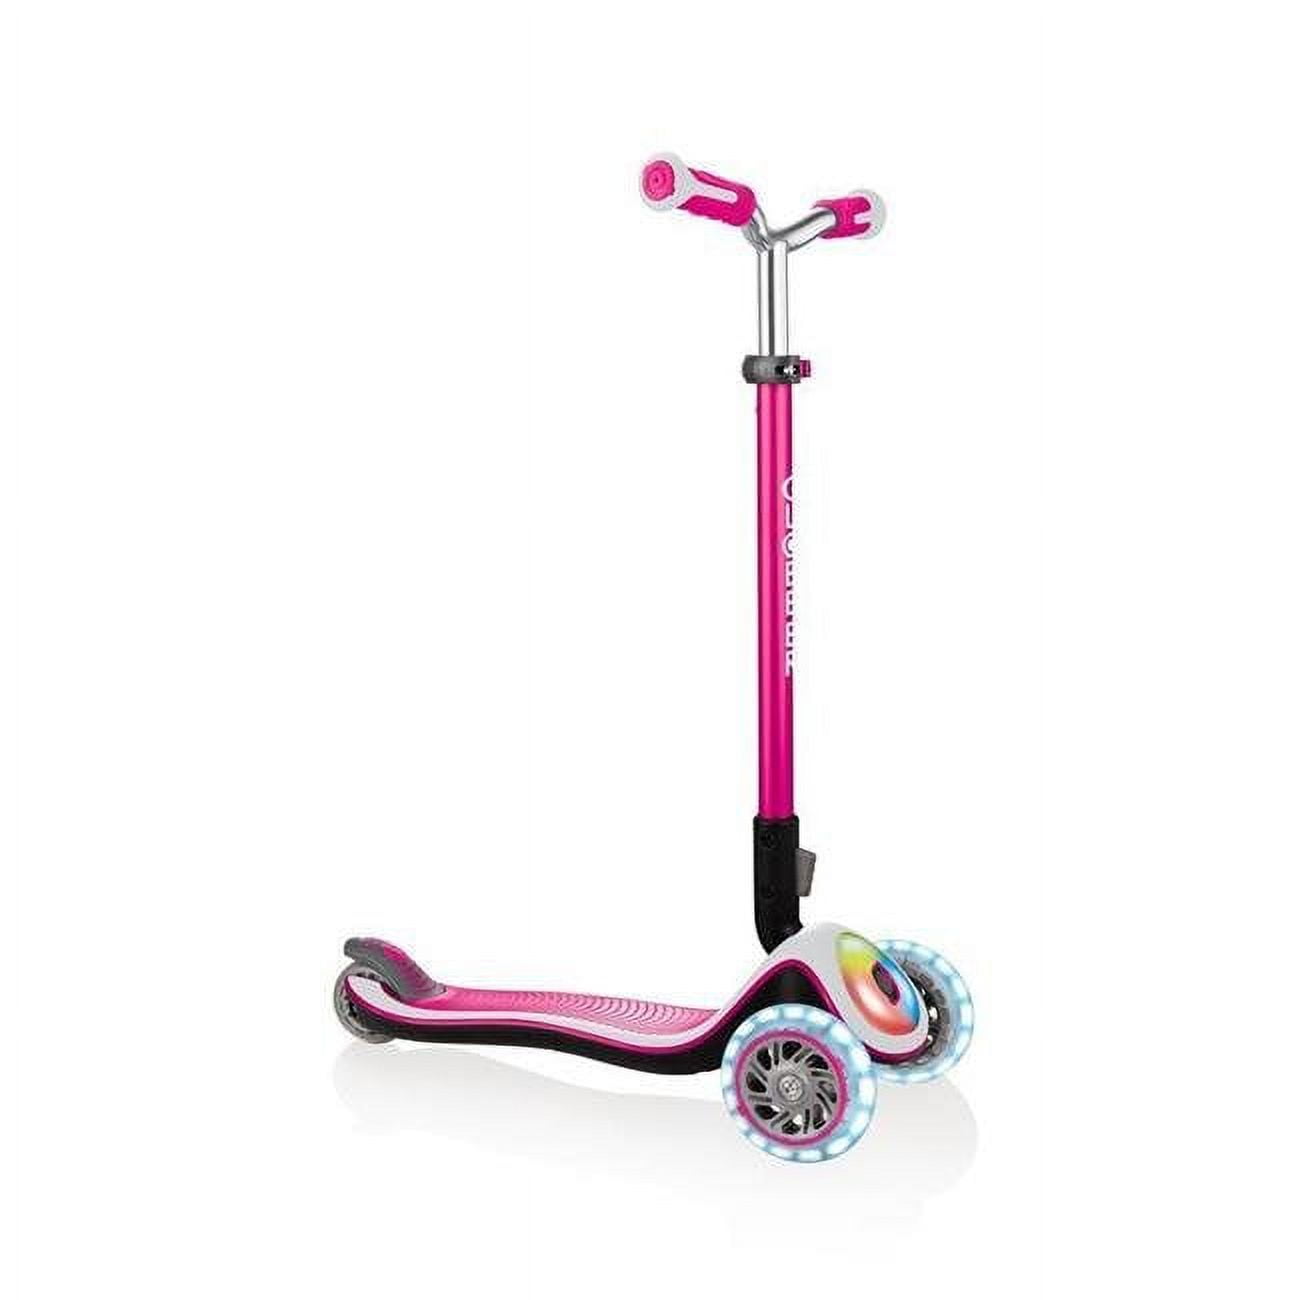 Globber 444-810 Elite Prime Flashing Head Deck & Light Up Wheel Scooter  with Anodized Tbar, Deep Pink Translucent 